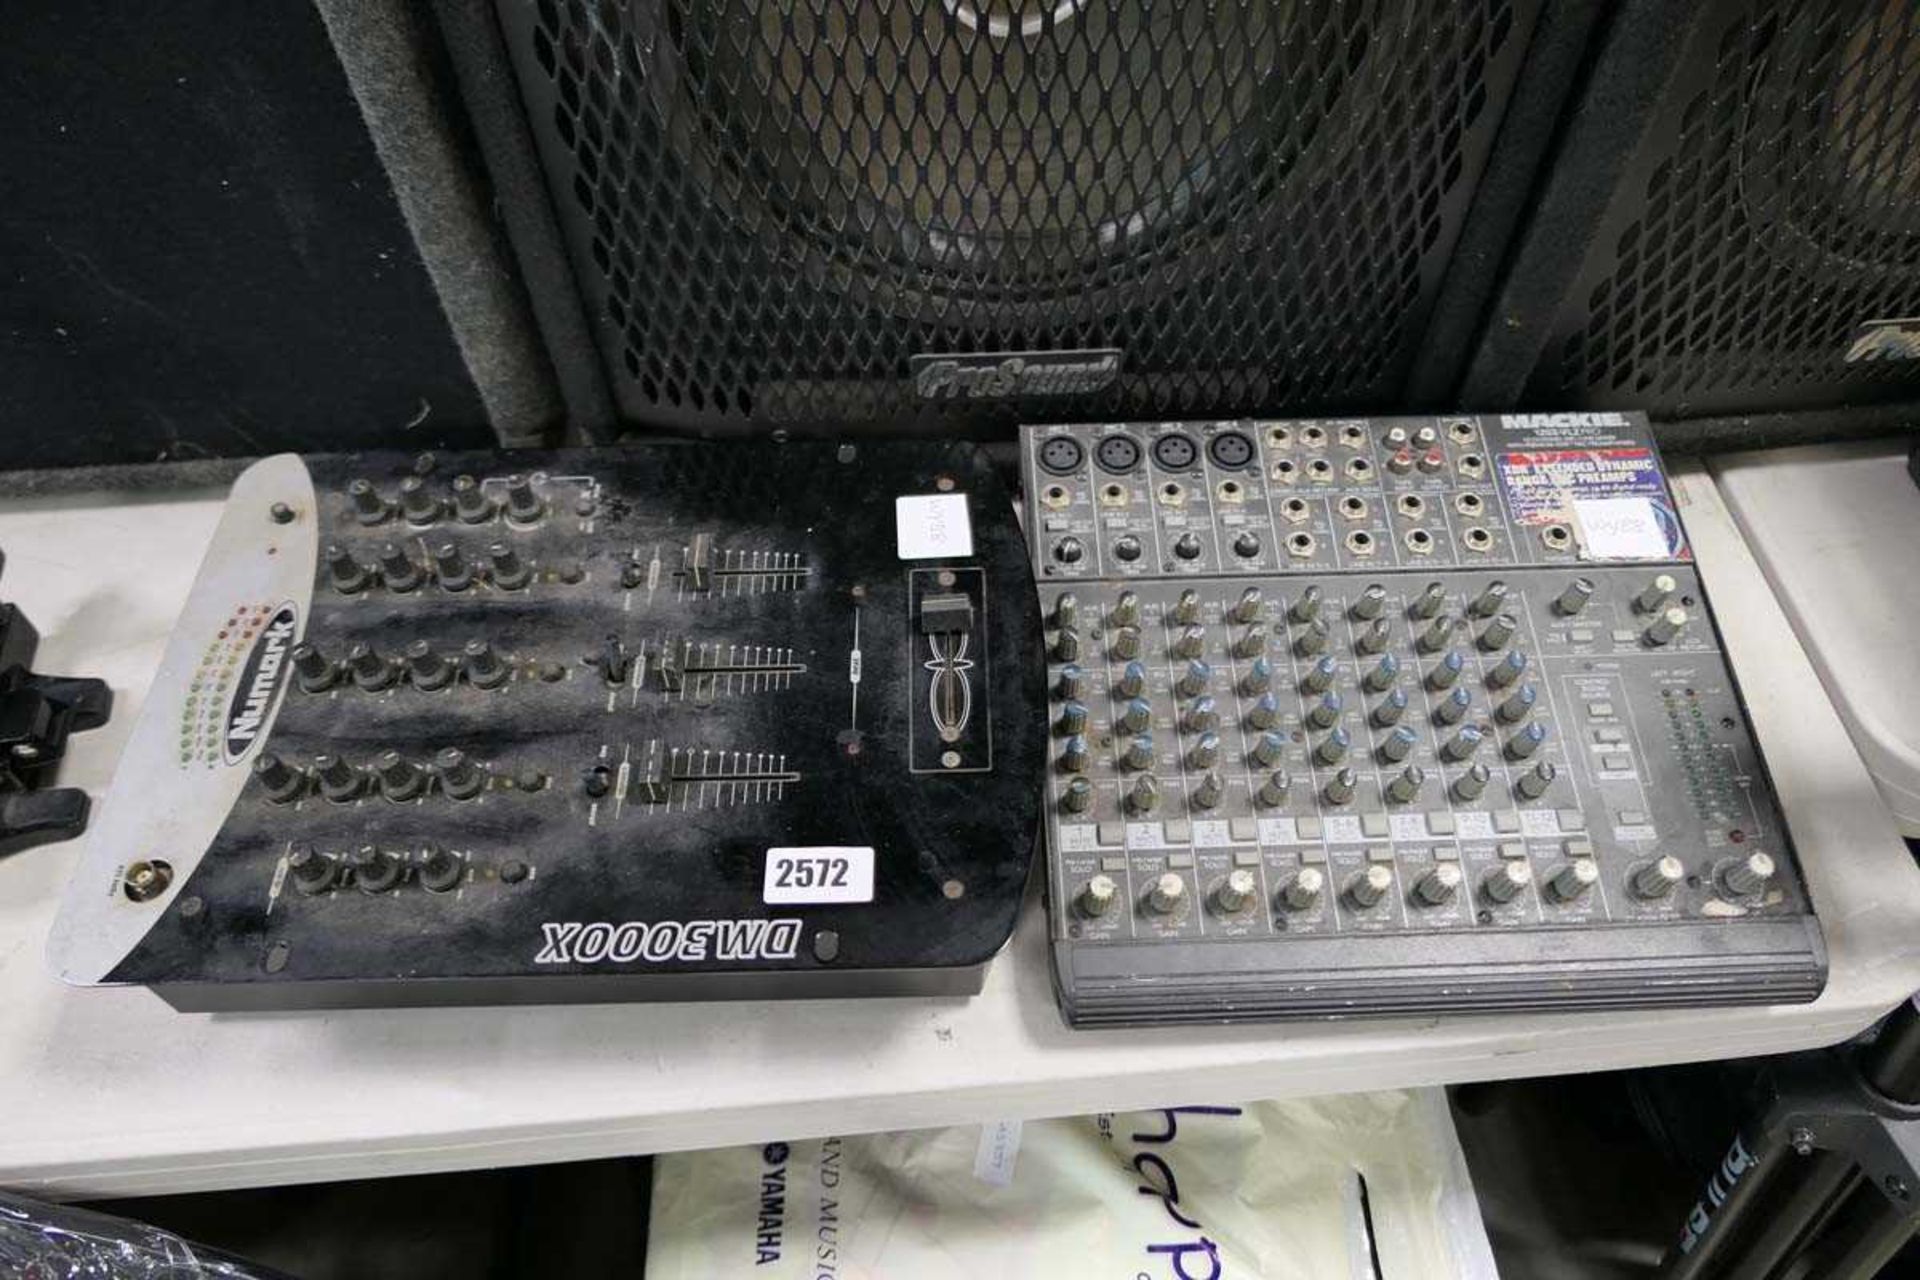 Newmark DM3000X mixer together with a Macky 1202 VLZ pro mixer